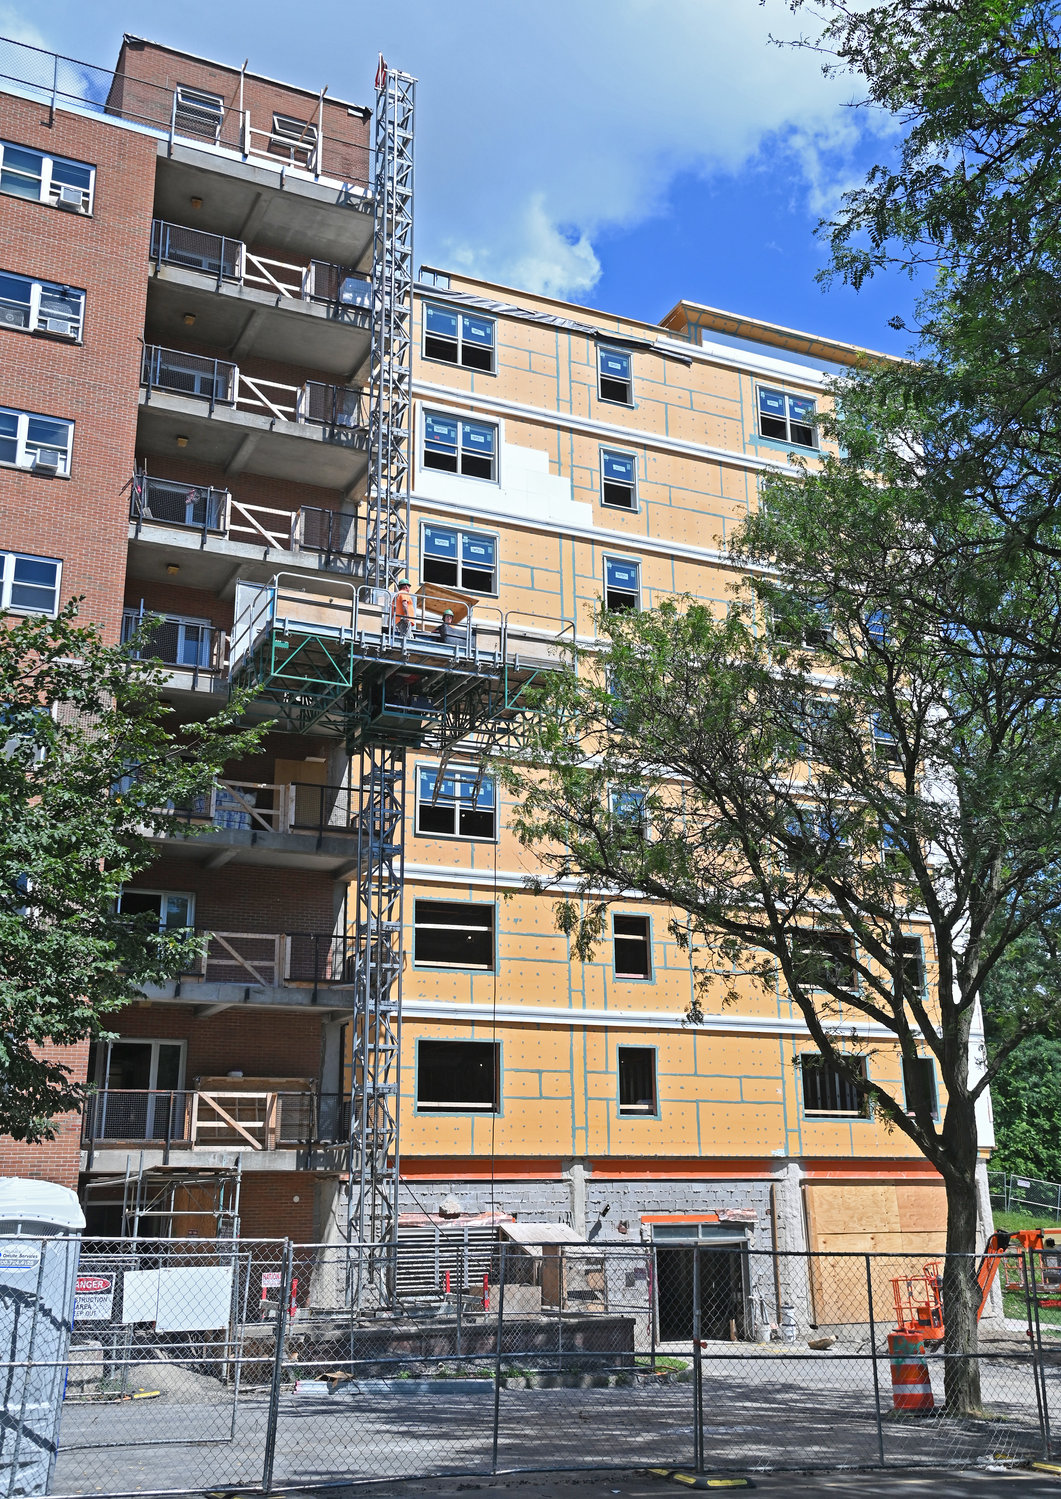 Construction work is well under way on the Colonial II Apartment Complex on Cottage Street in Rome on Thursday. Construction started on half of the building and will be completed before starting on the rest of the building.